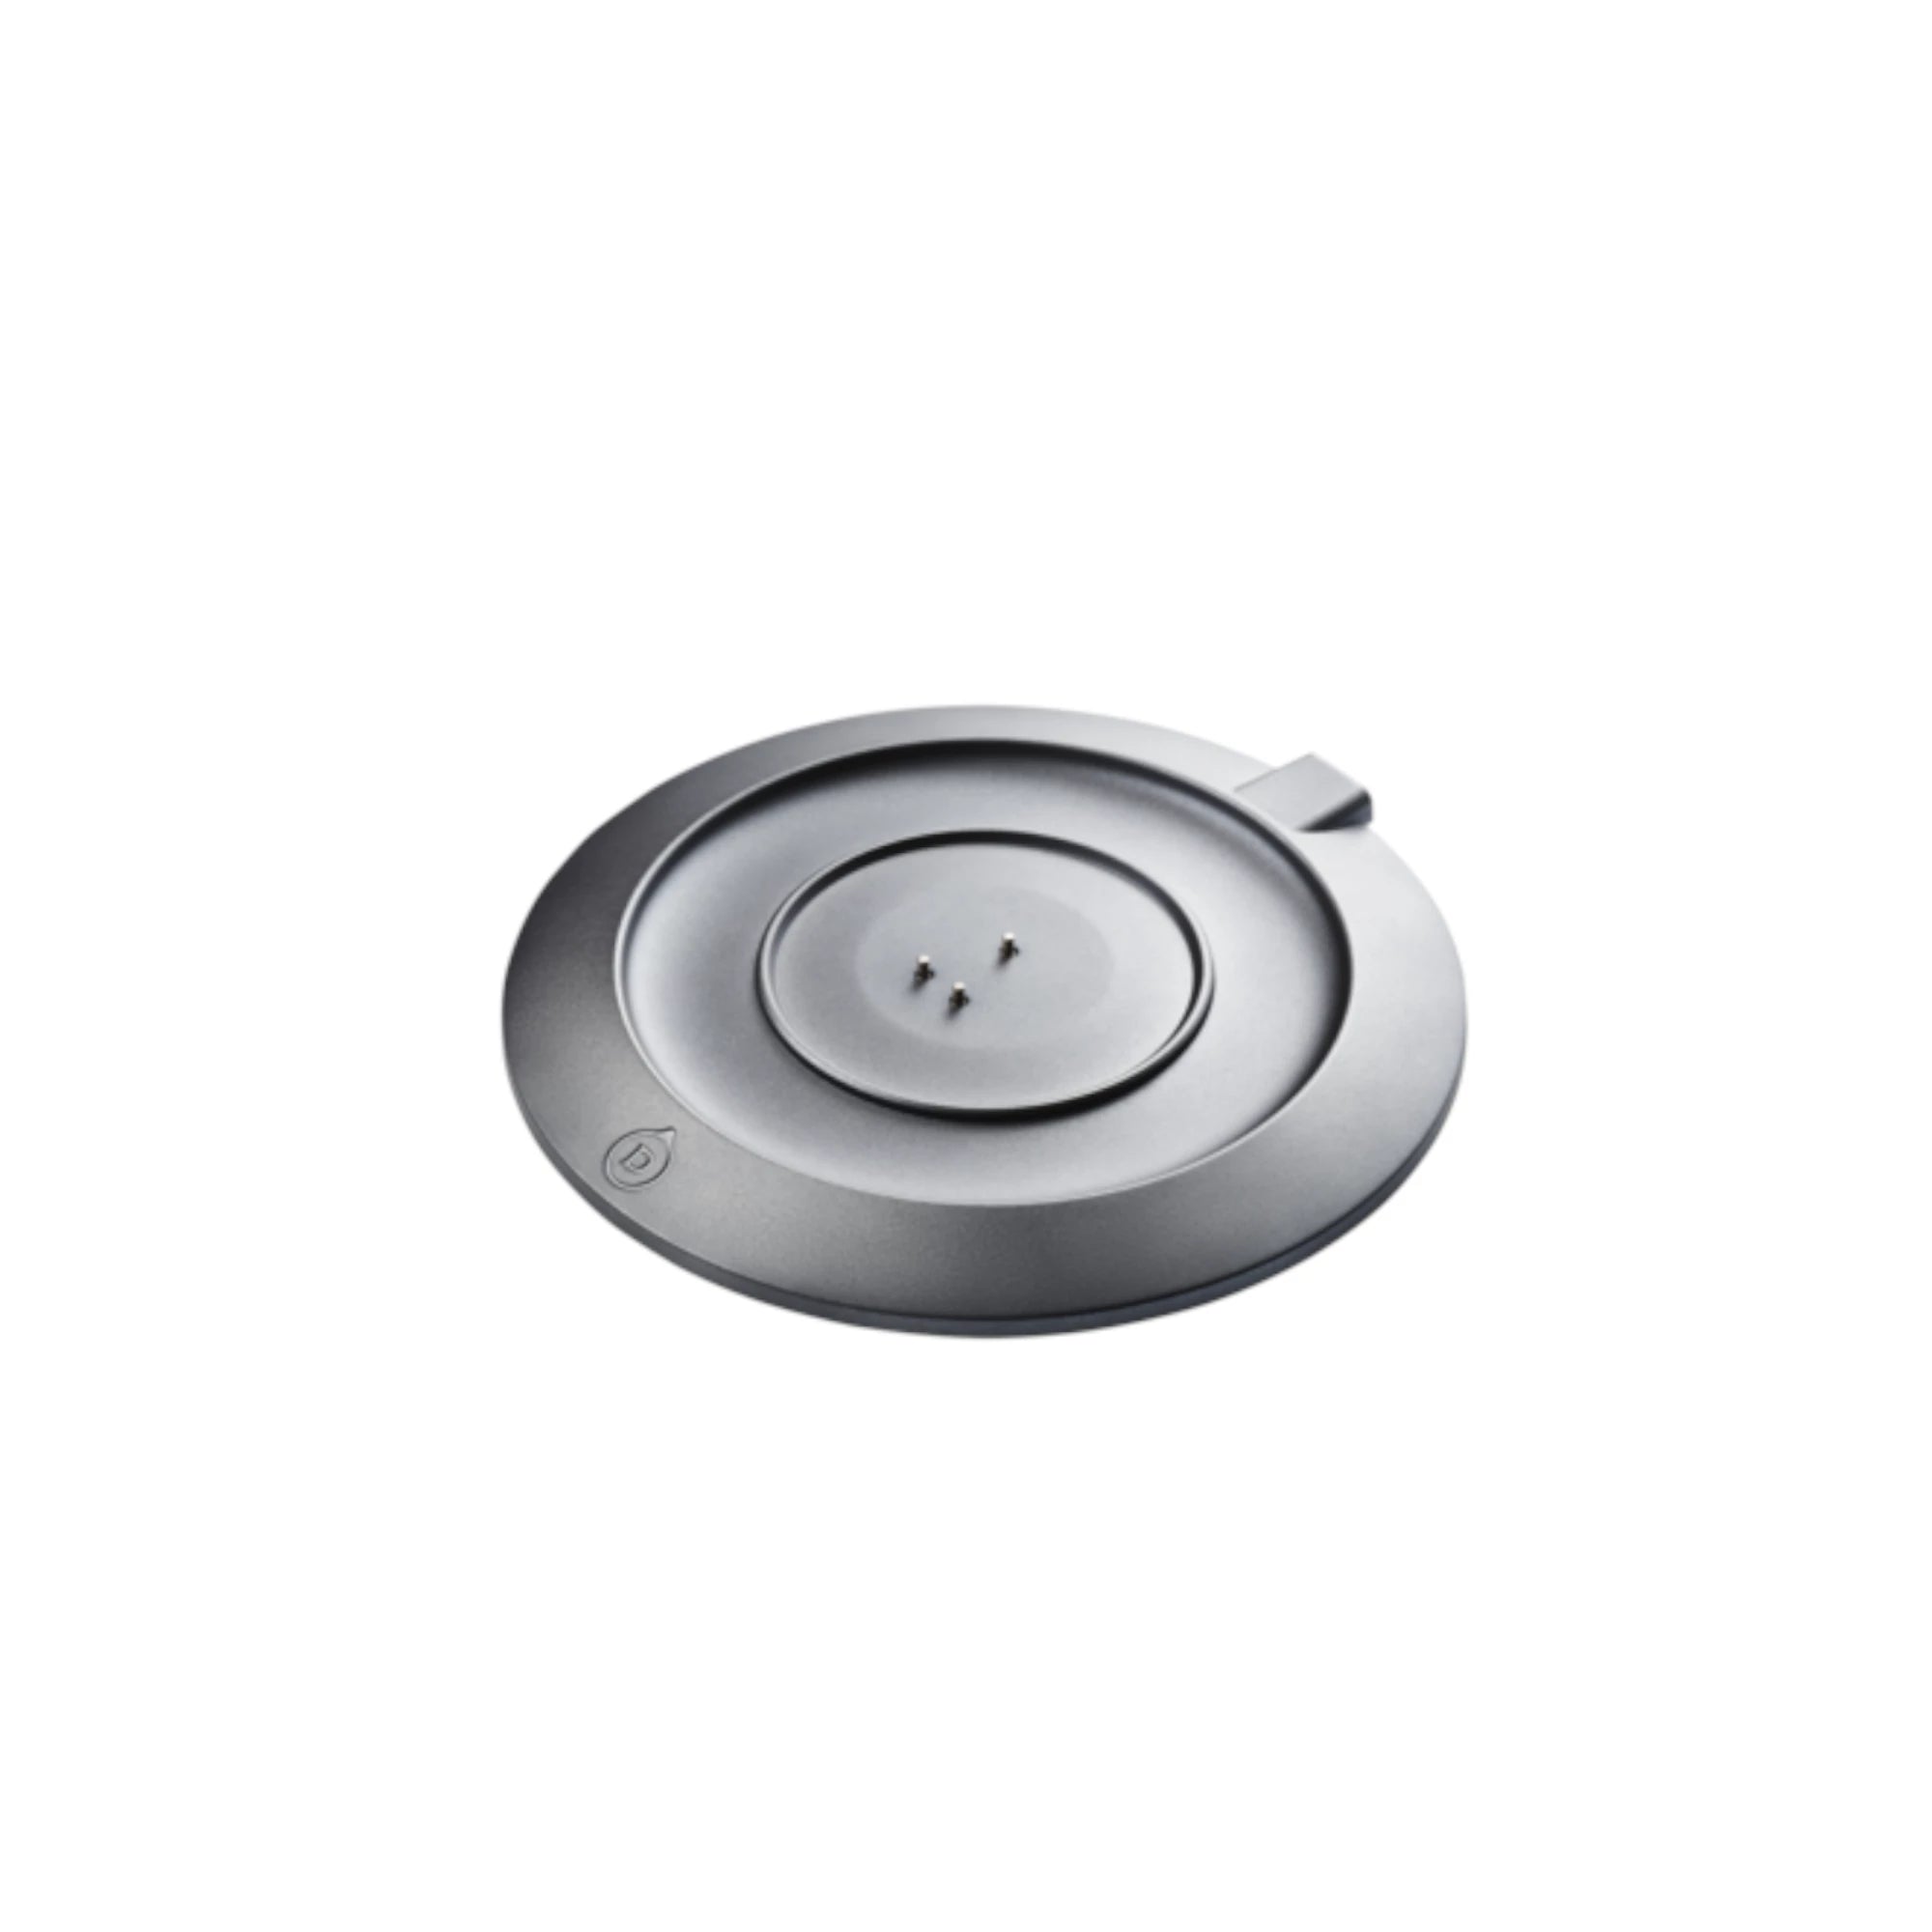 Devialet Mania Station - Wireless Charging Dock